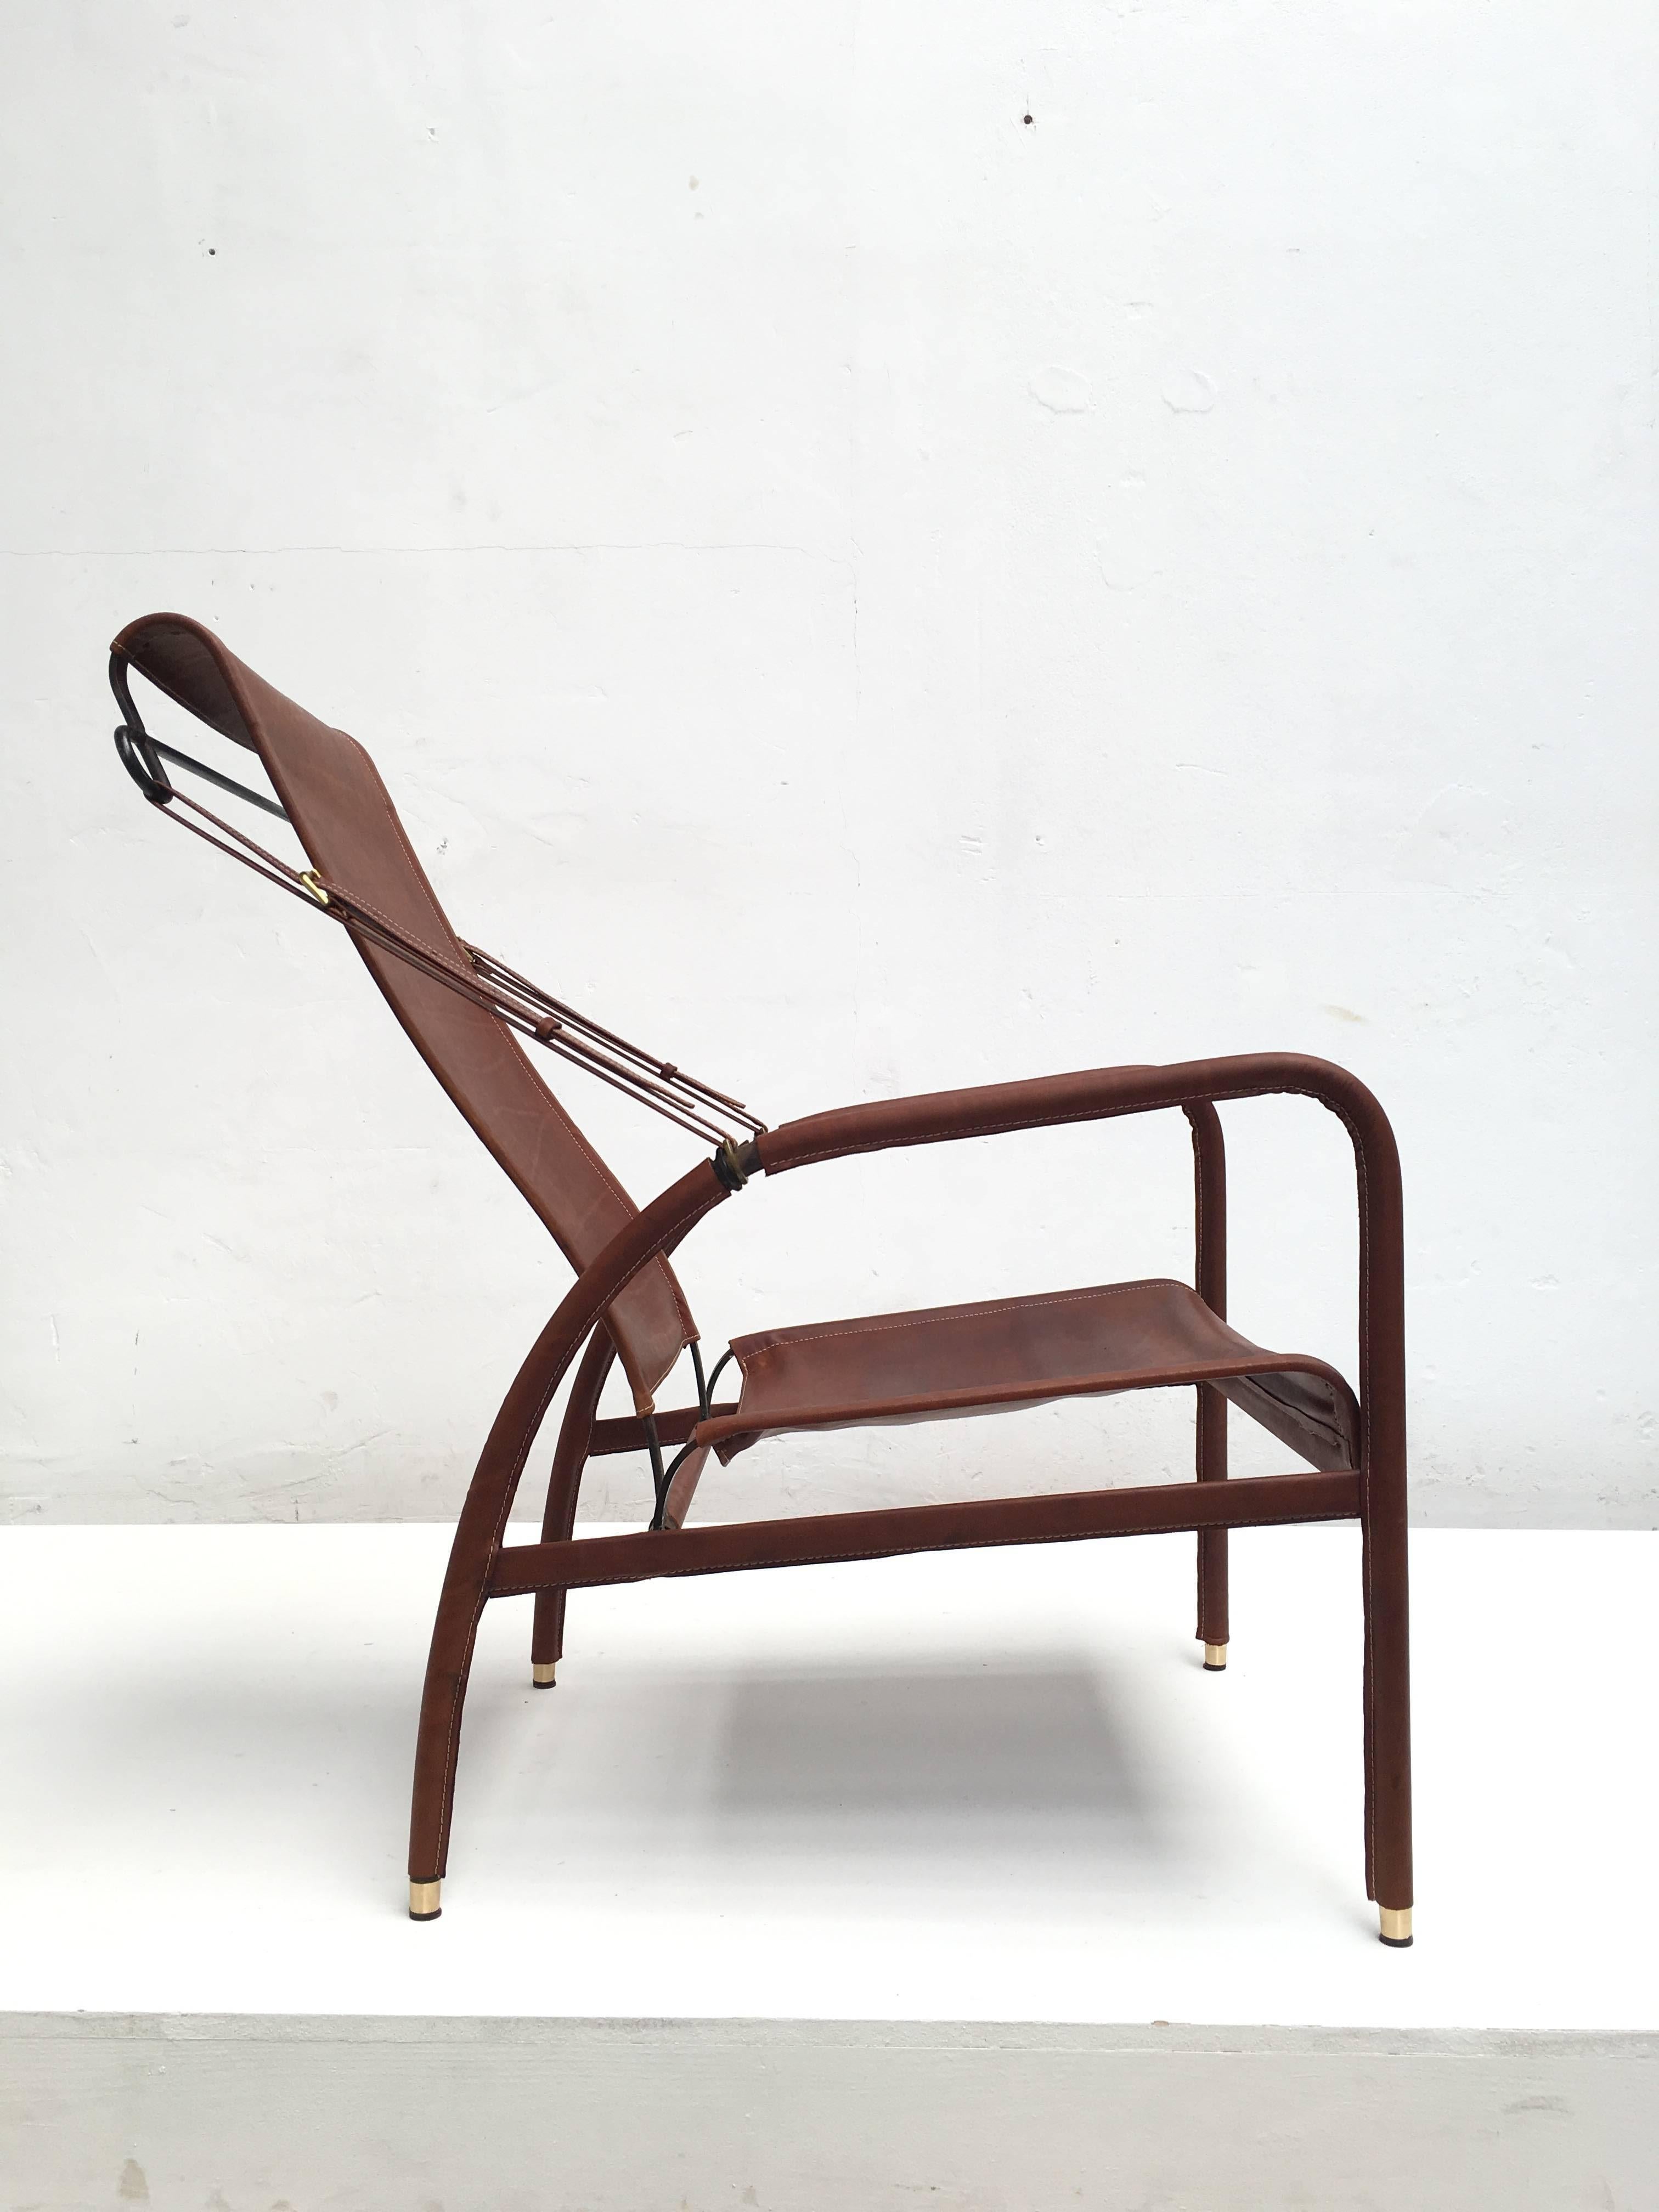 Handsome and rare Jacques Adnet lounge chair recently refinished in beautiful hand-stitched leather by specialist upholsterer 'Couch and Cover' in Antwerp. Lovely brass details to the feet, armrest finishers and buckles.

This chair was in a